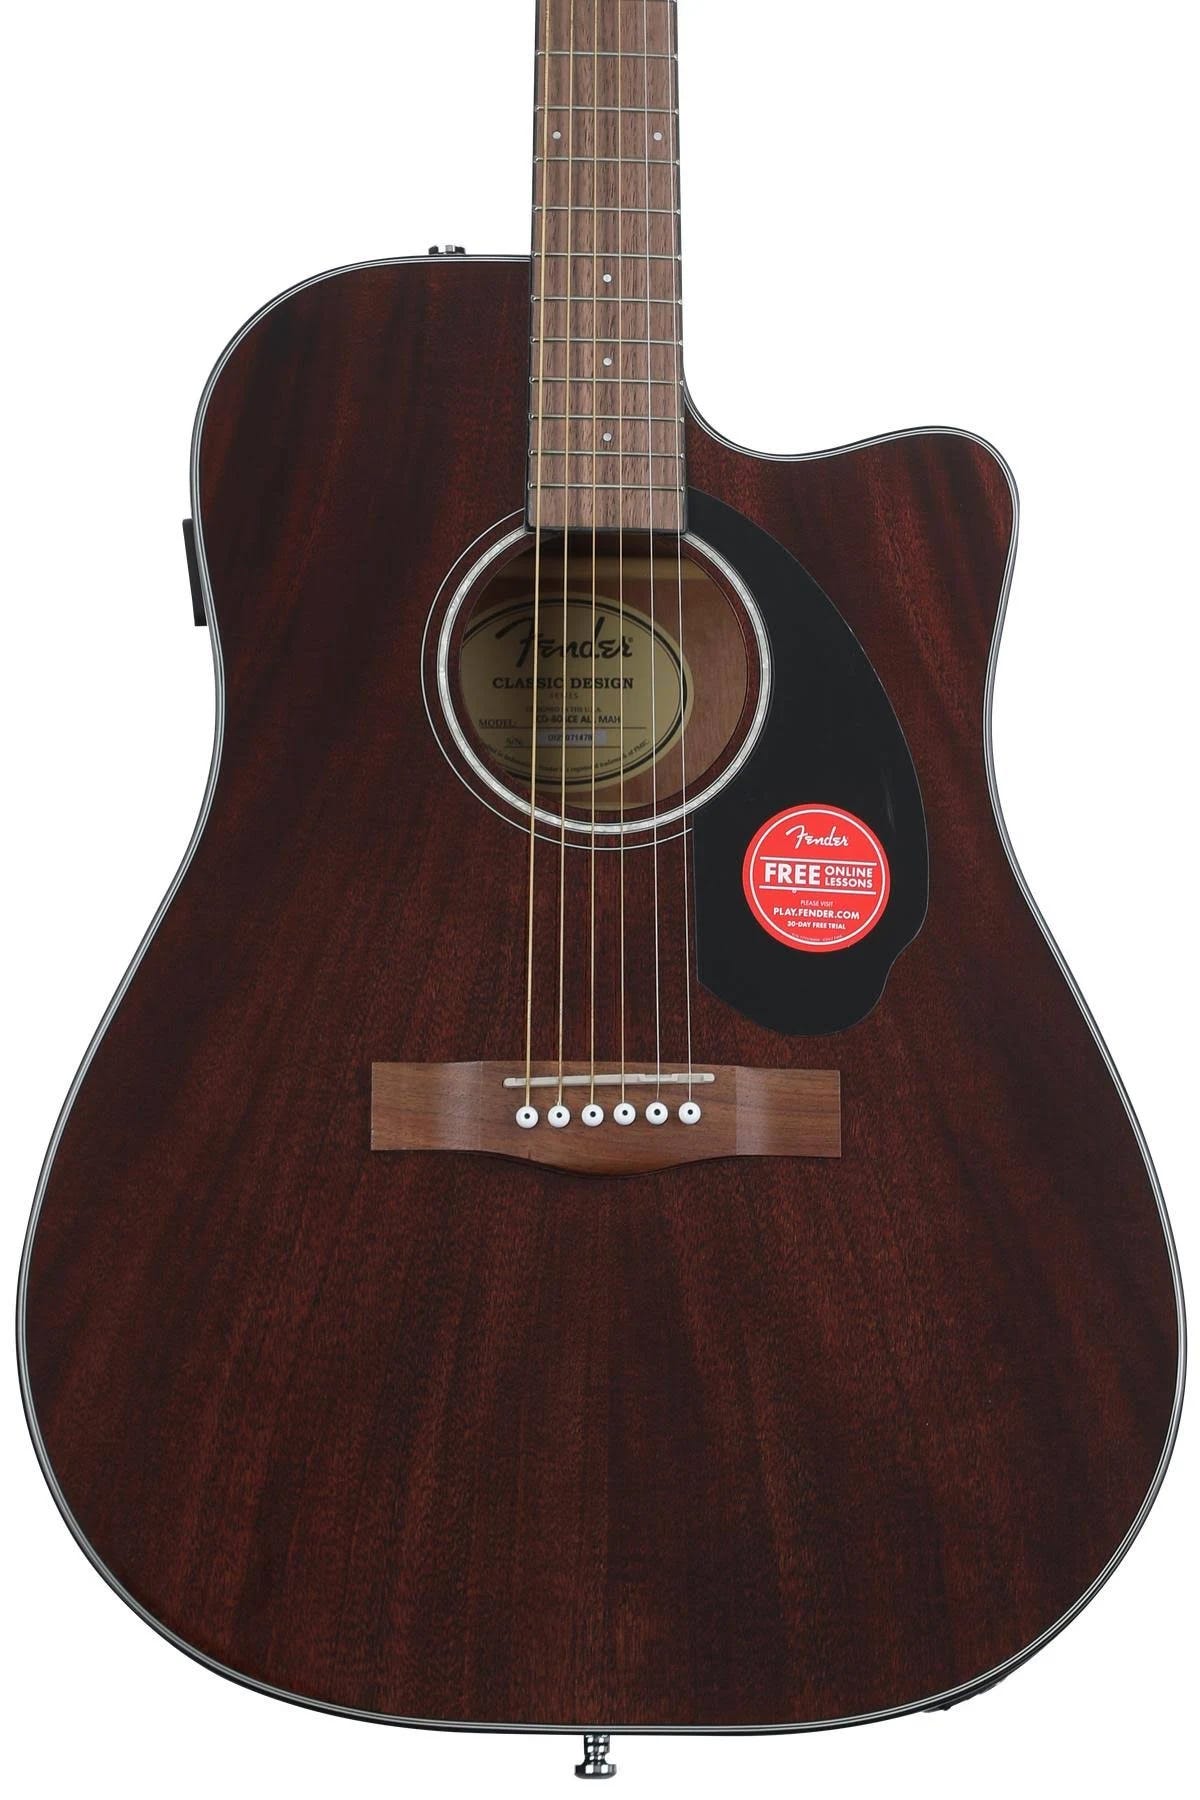 Classic Mahogany Dreadnought Acoustic Guitar with Fishman Electronics | Image